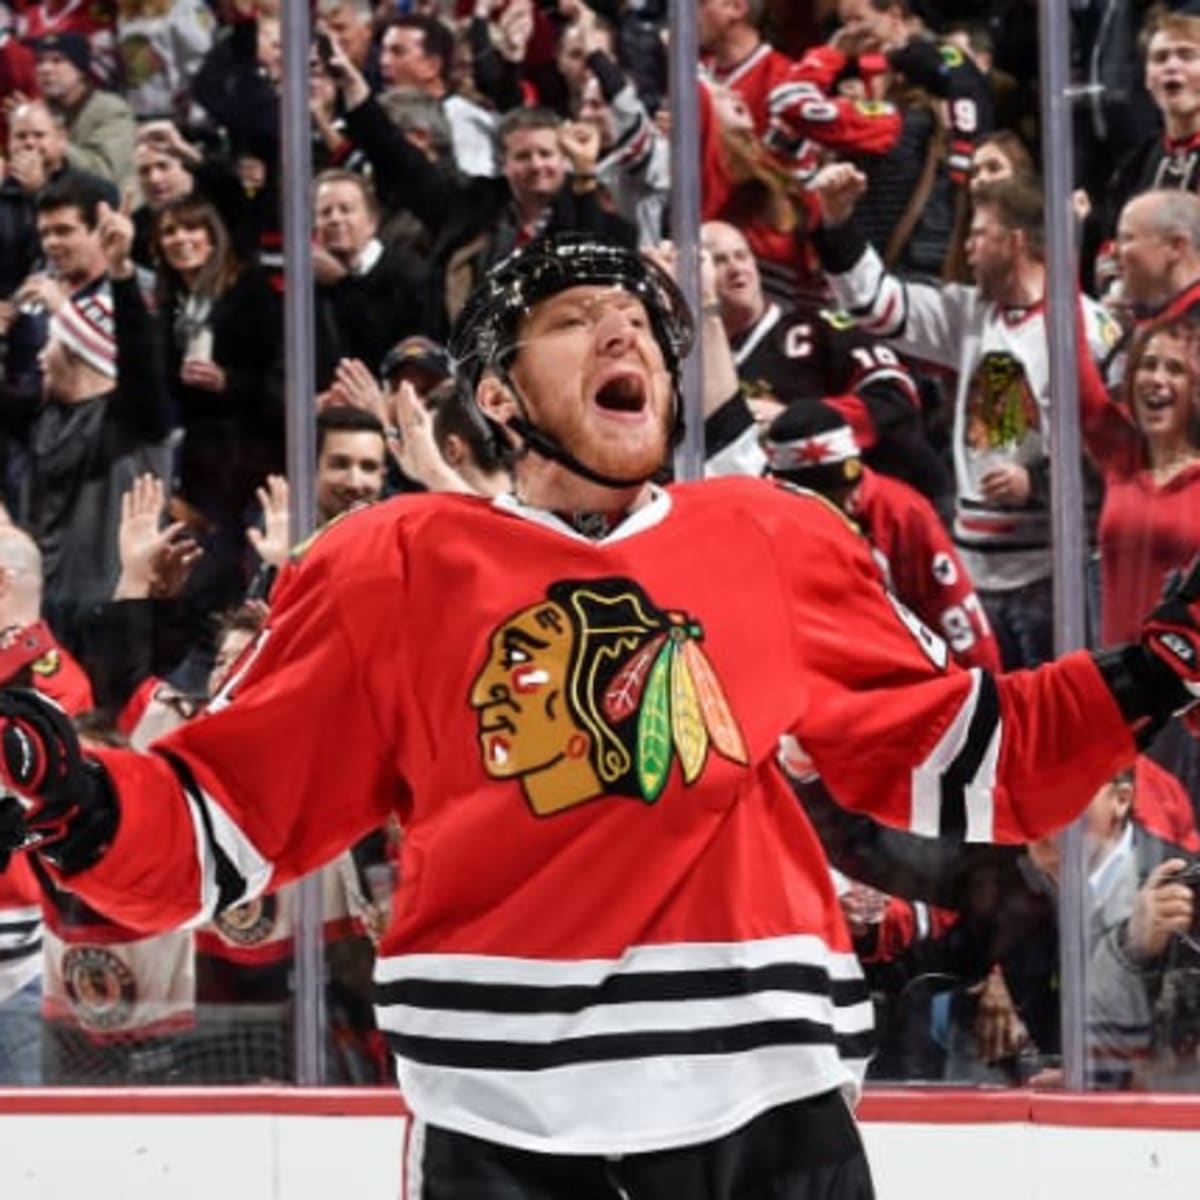 Marian Hossa to miss NHL season, reportedly due to allergy to